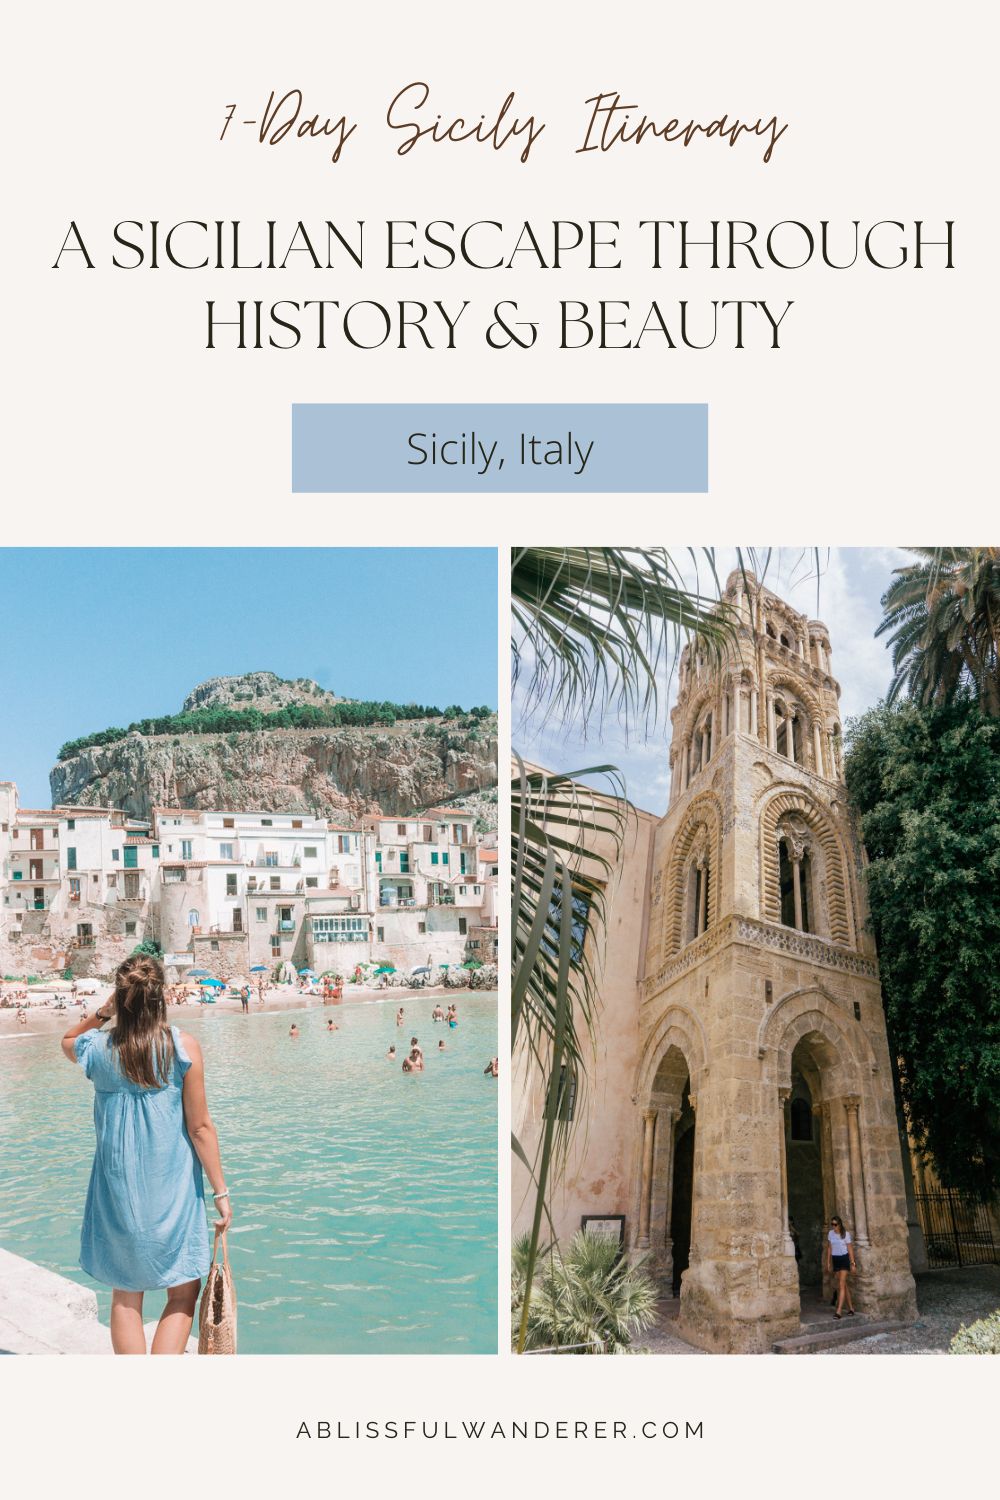 7-Day Sicily Itinerary pin: 2 pictures one in Palermo and one in Cefalu